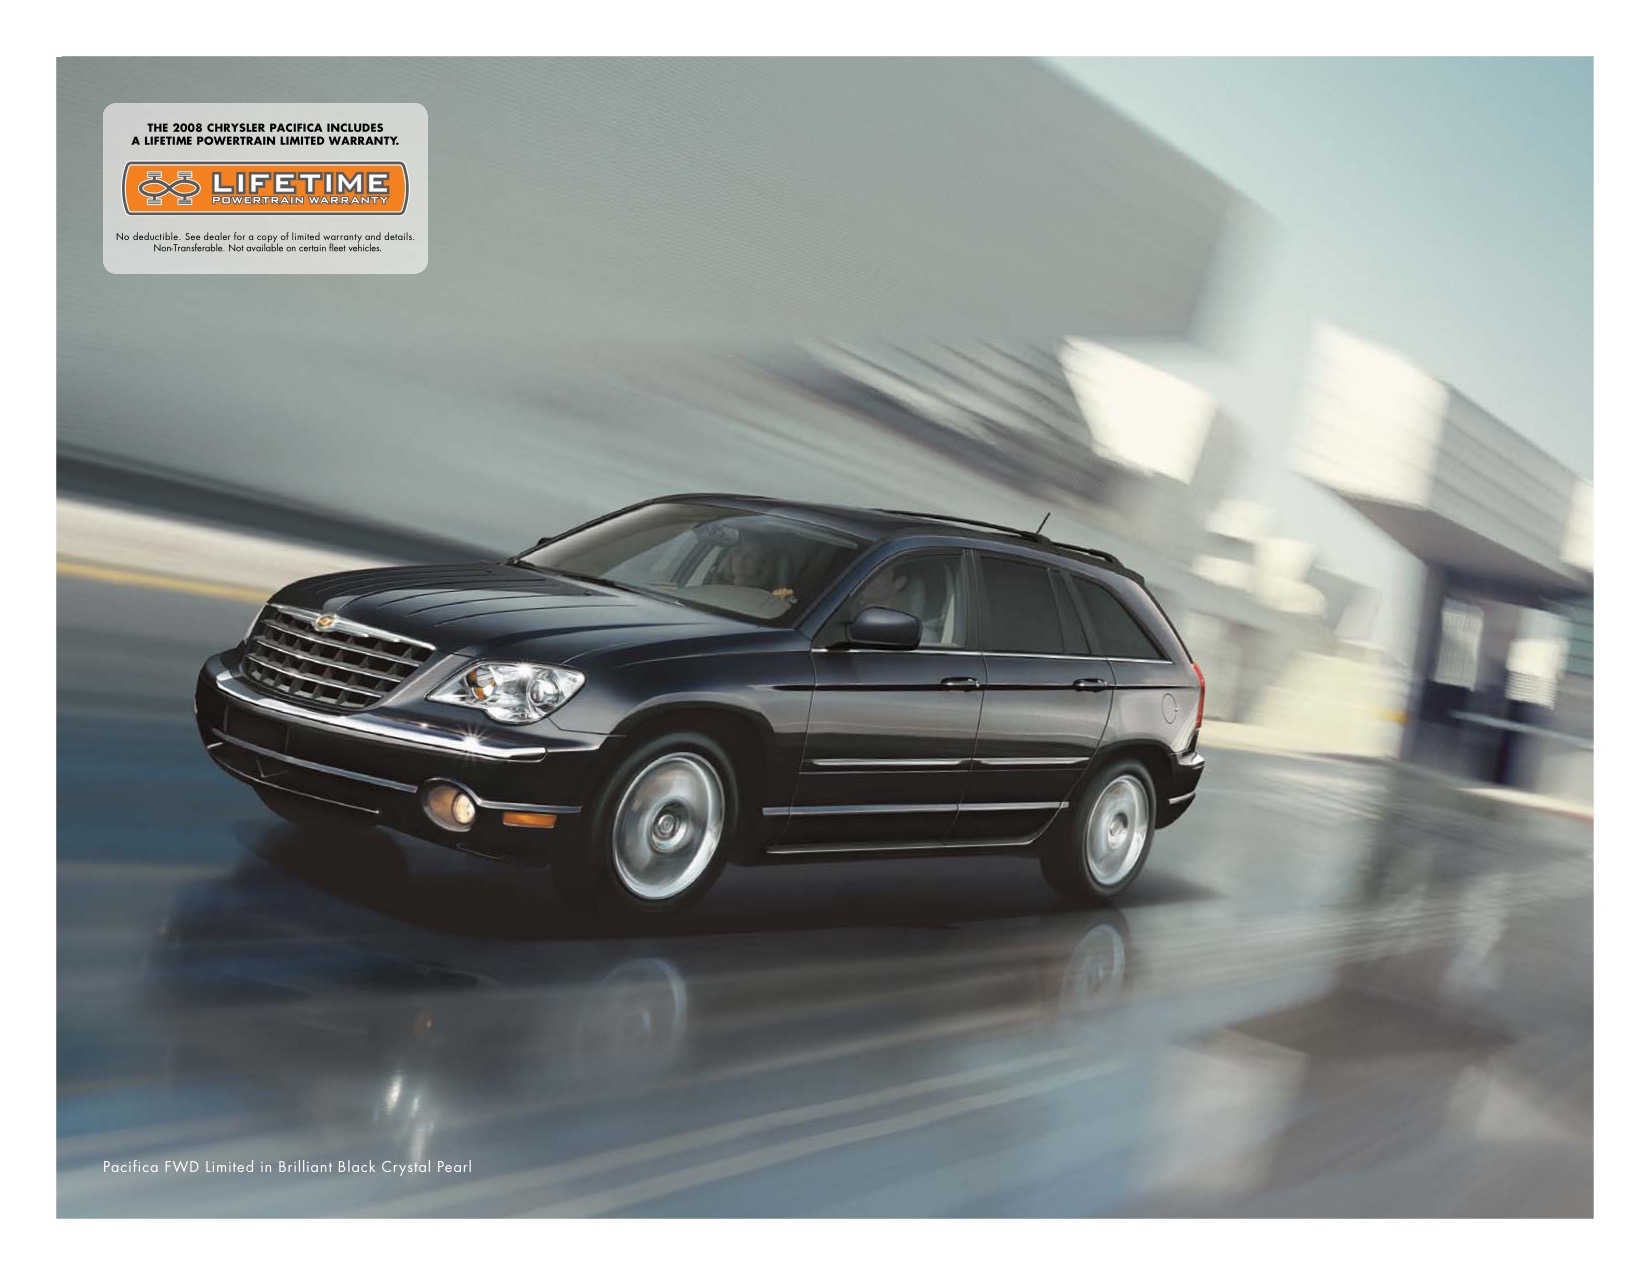 2008 Chrysler Pacifica Brochure Page 10